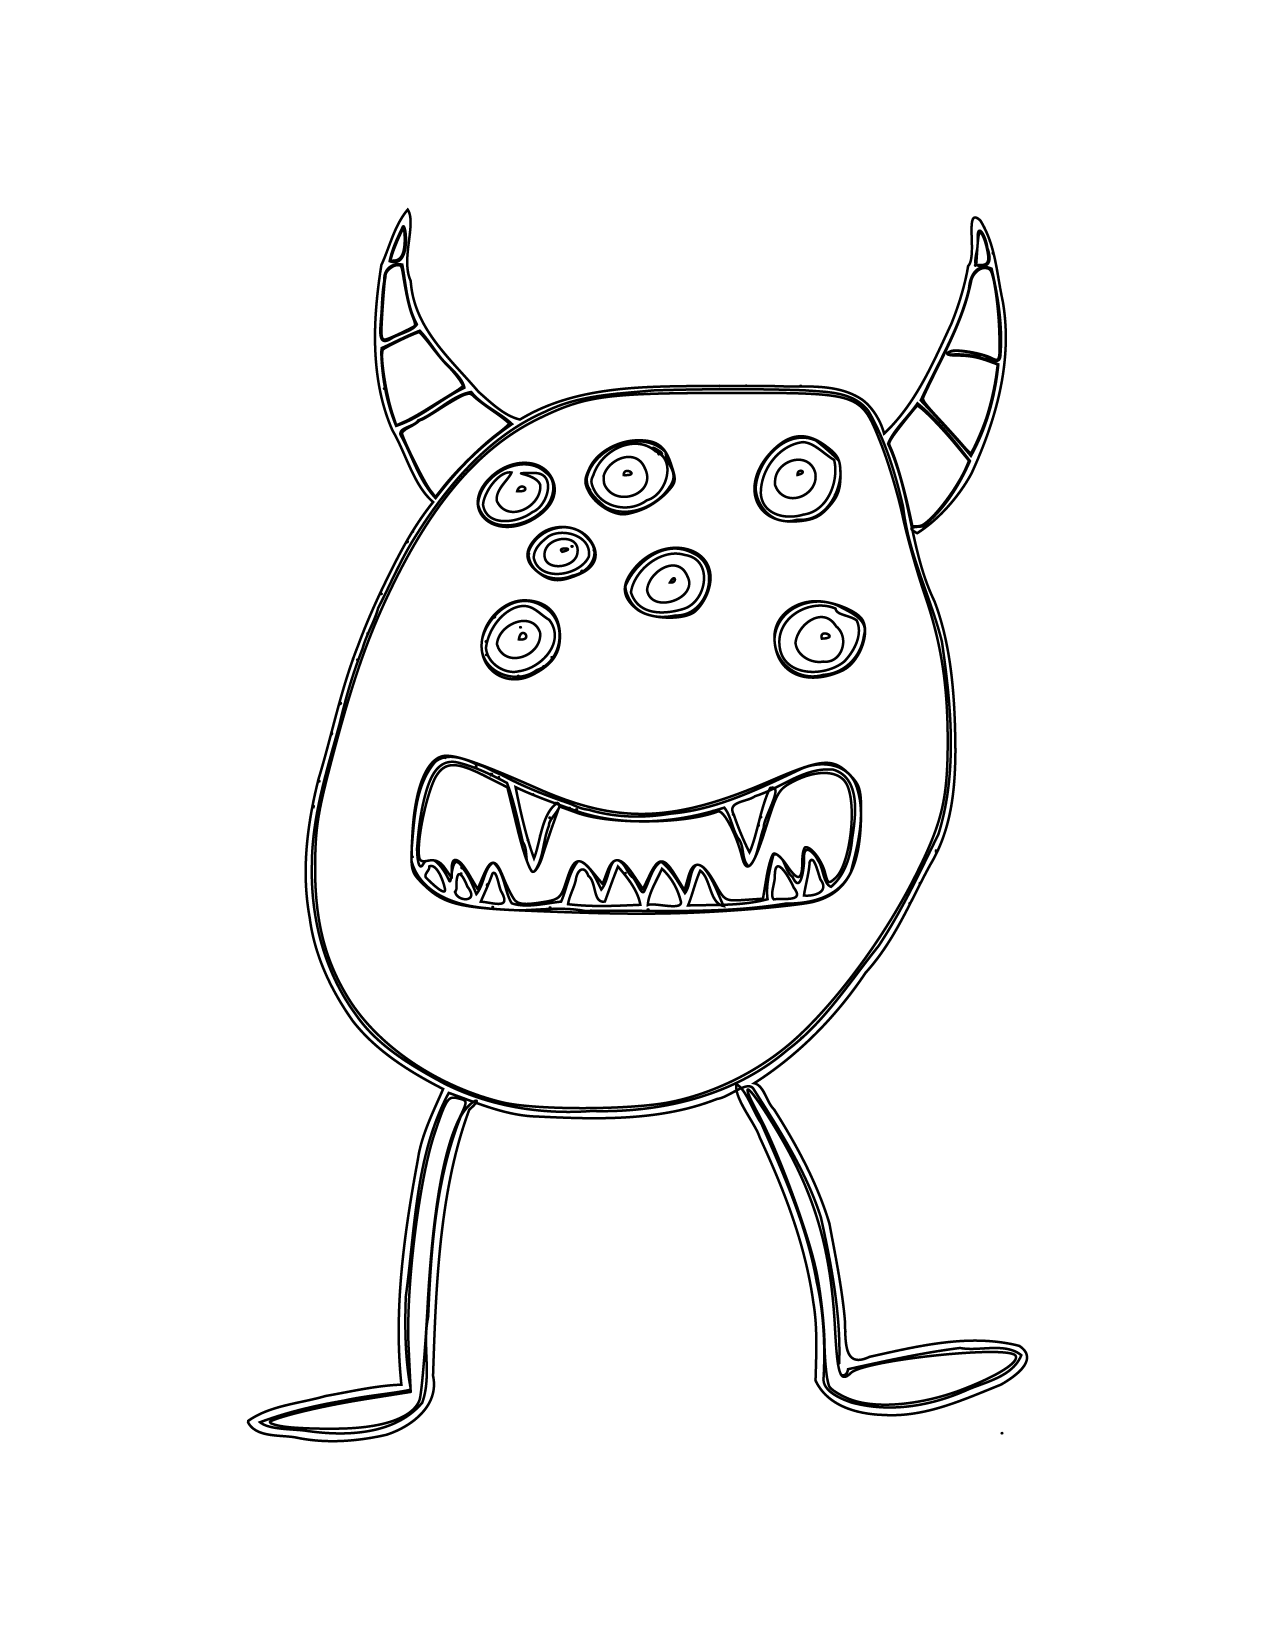 Seven Eye Monster Coloring Page